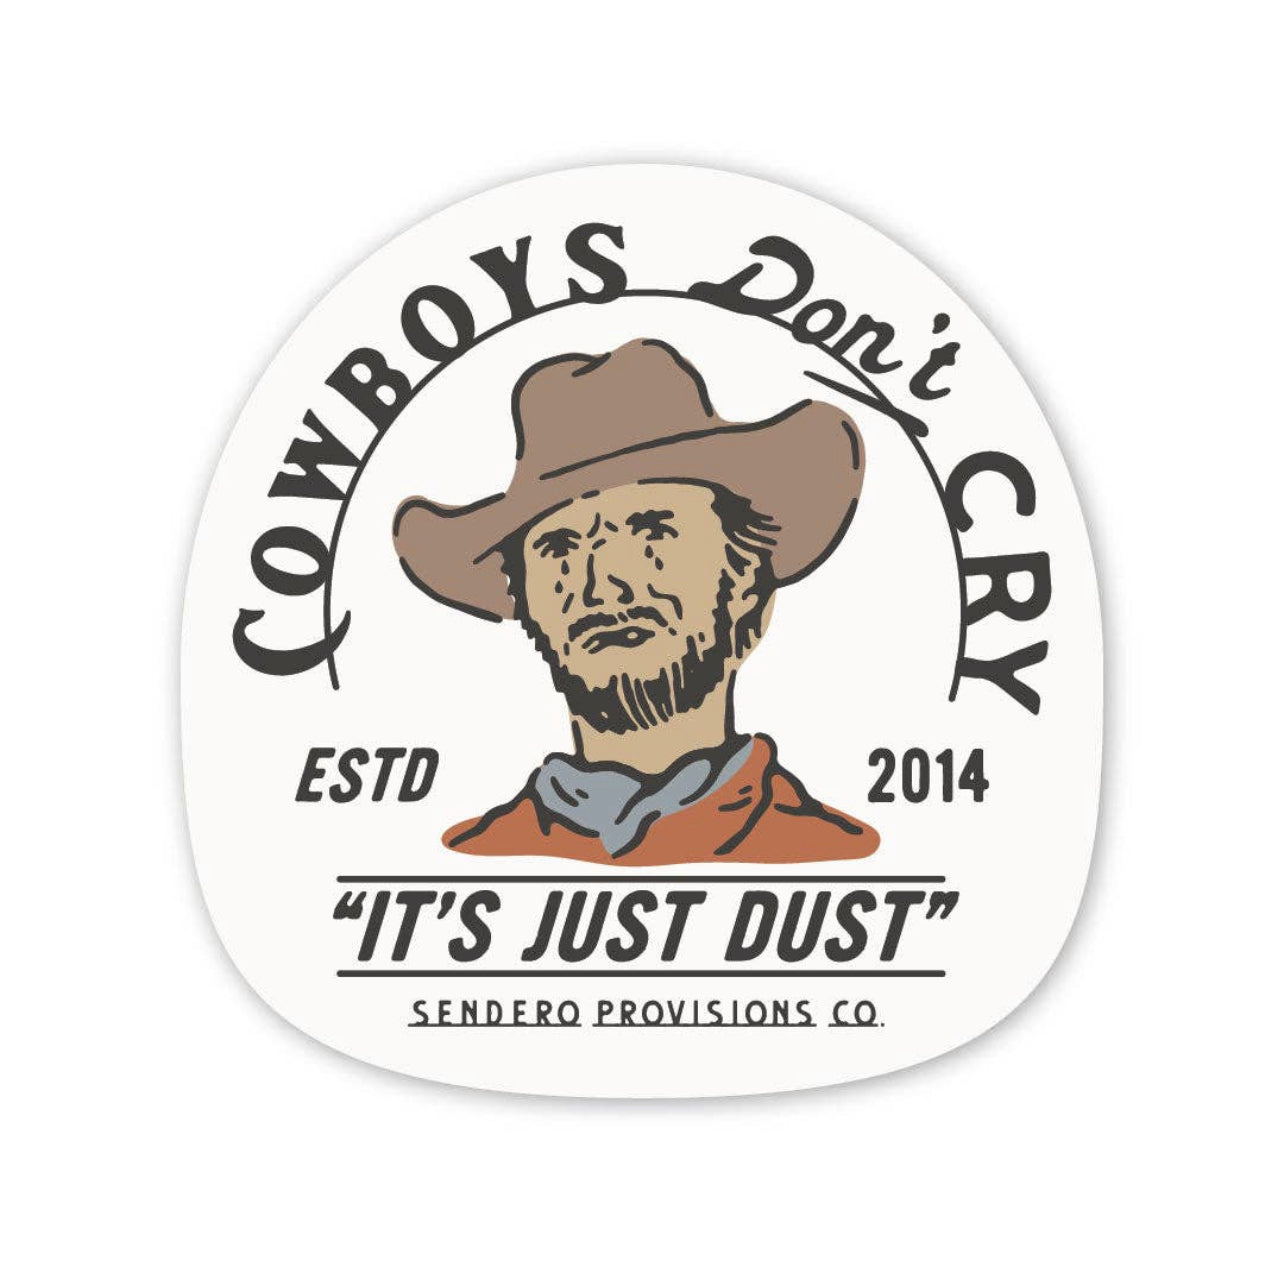 Cowboys Don’t Cry Sticker